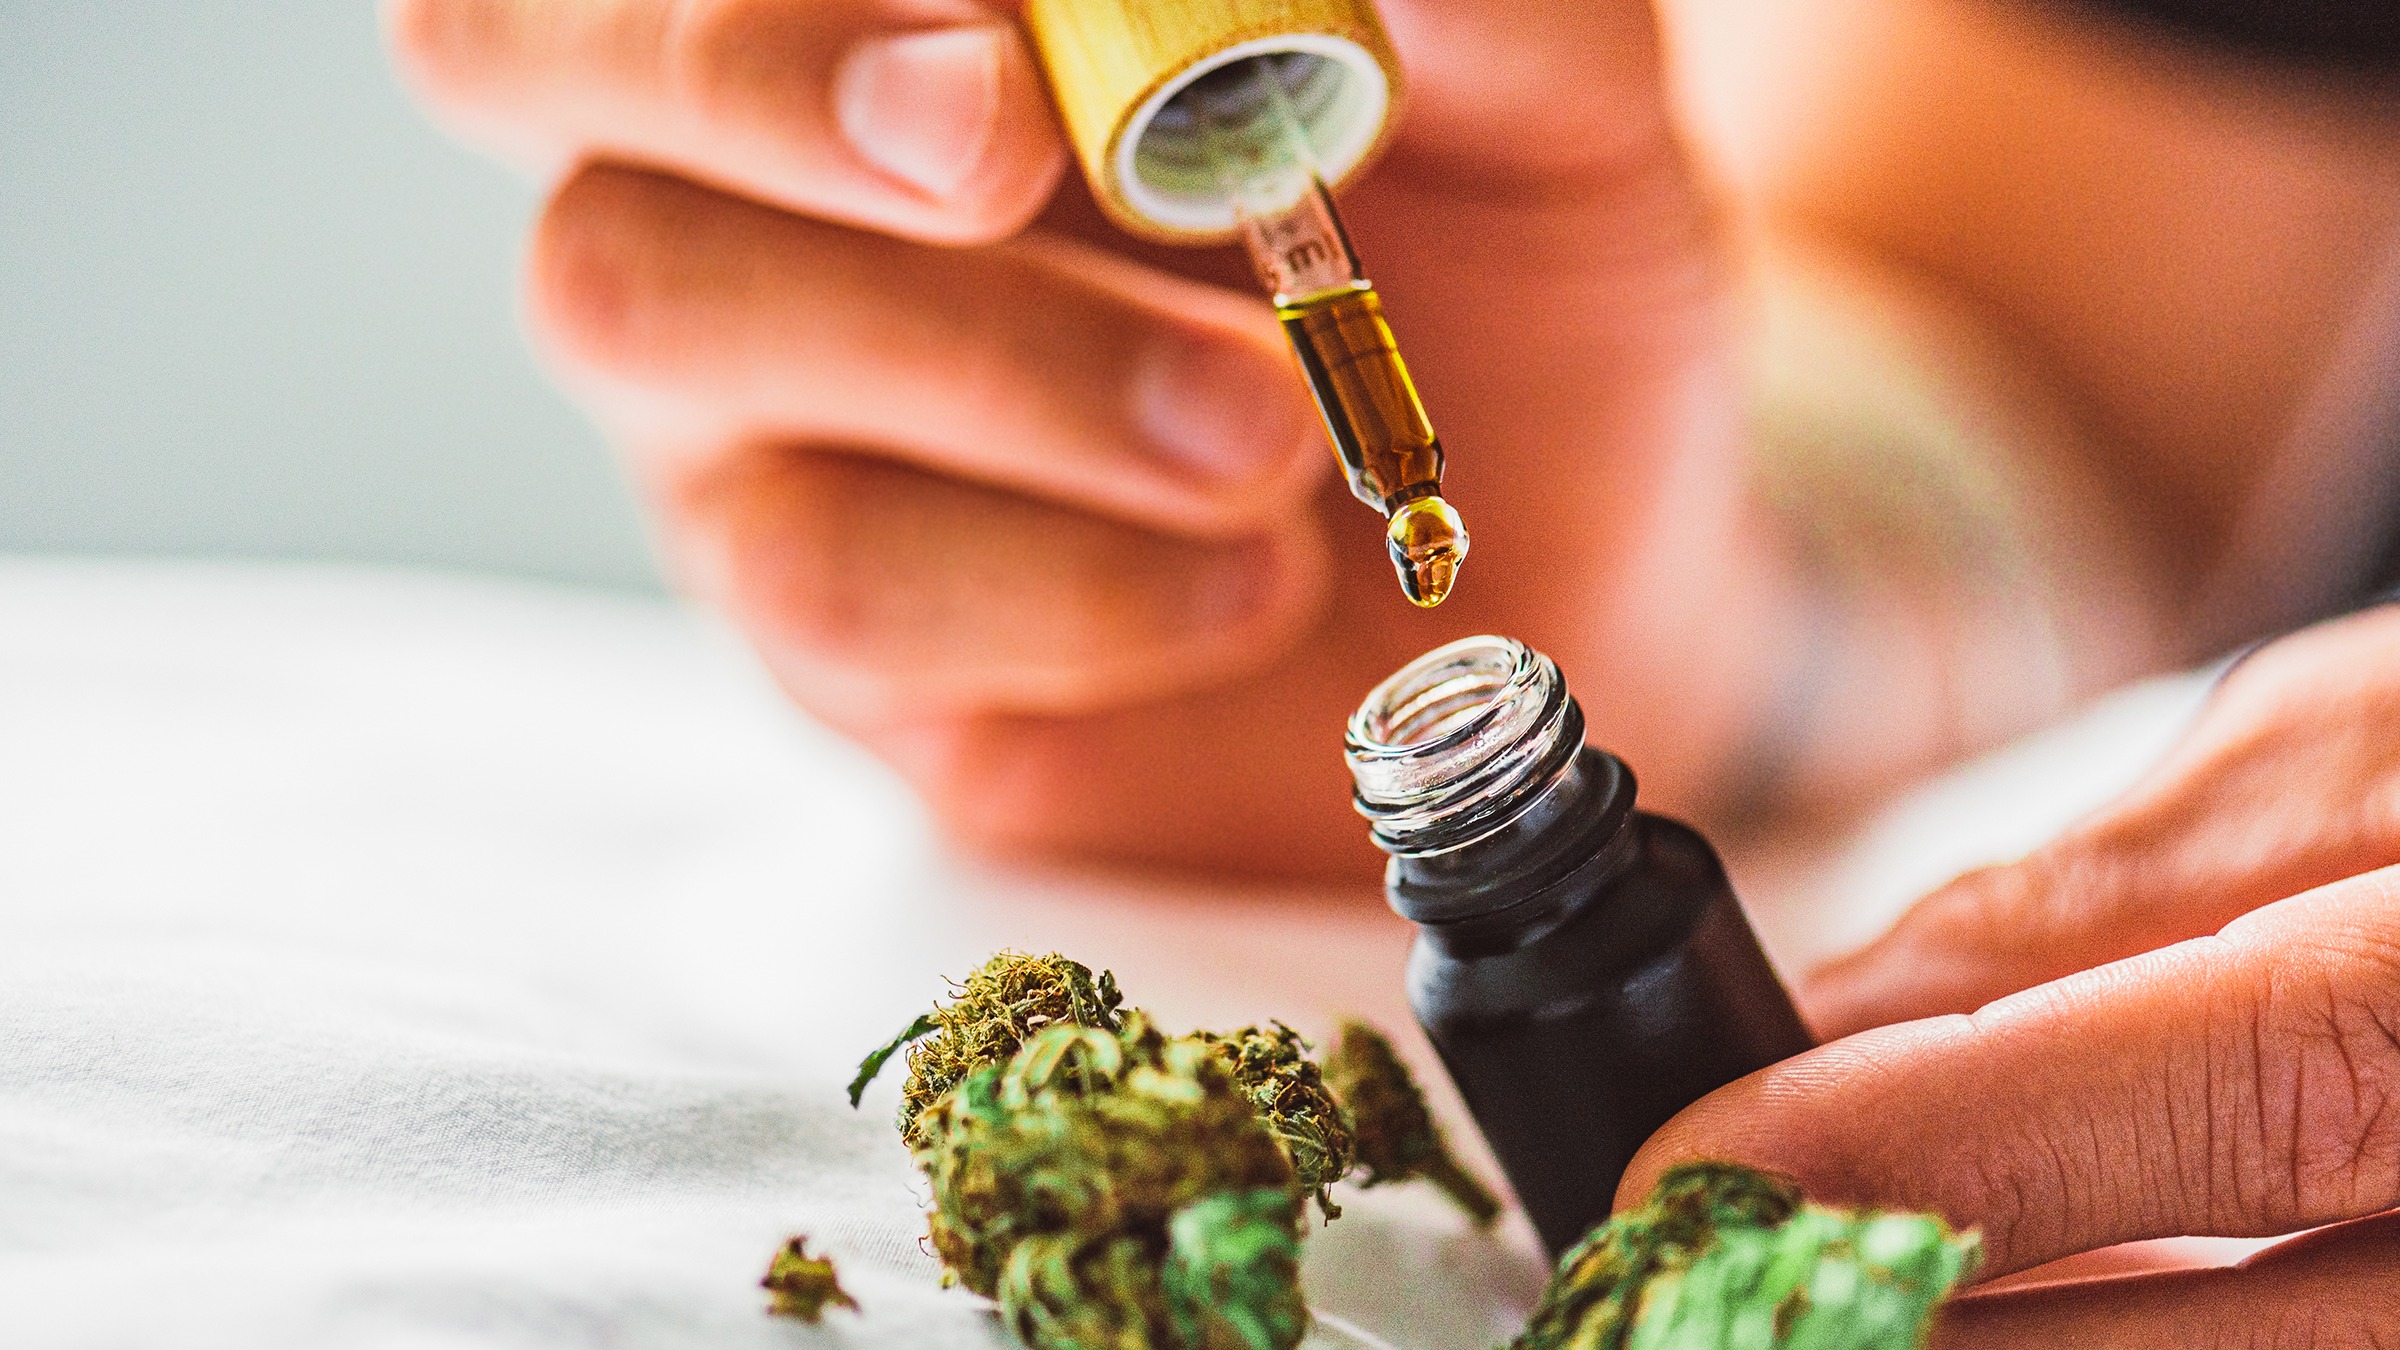 How to Properly Use CBD Oil for Maximum Benefits